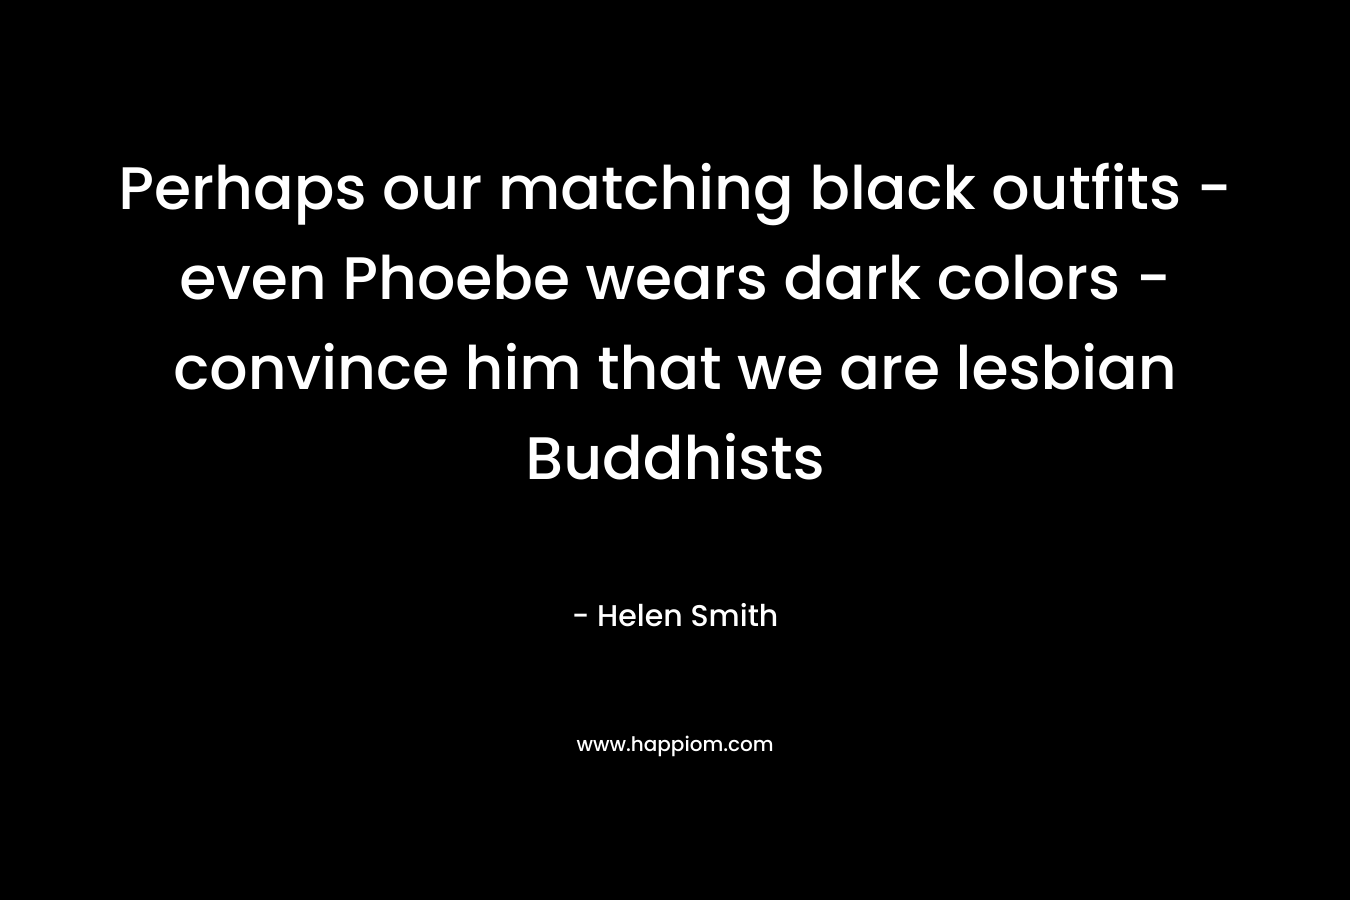 Perhaps our matching black outfits - even Phoebe wears dark colors - convince him that we are lesbian Buddhists